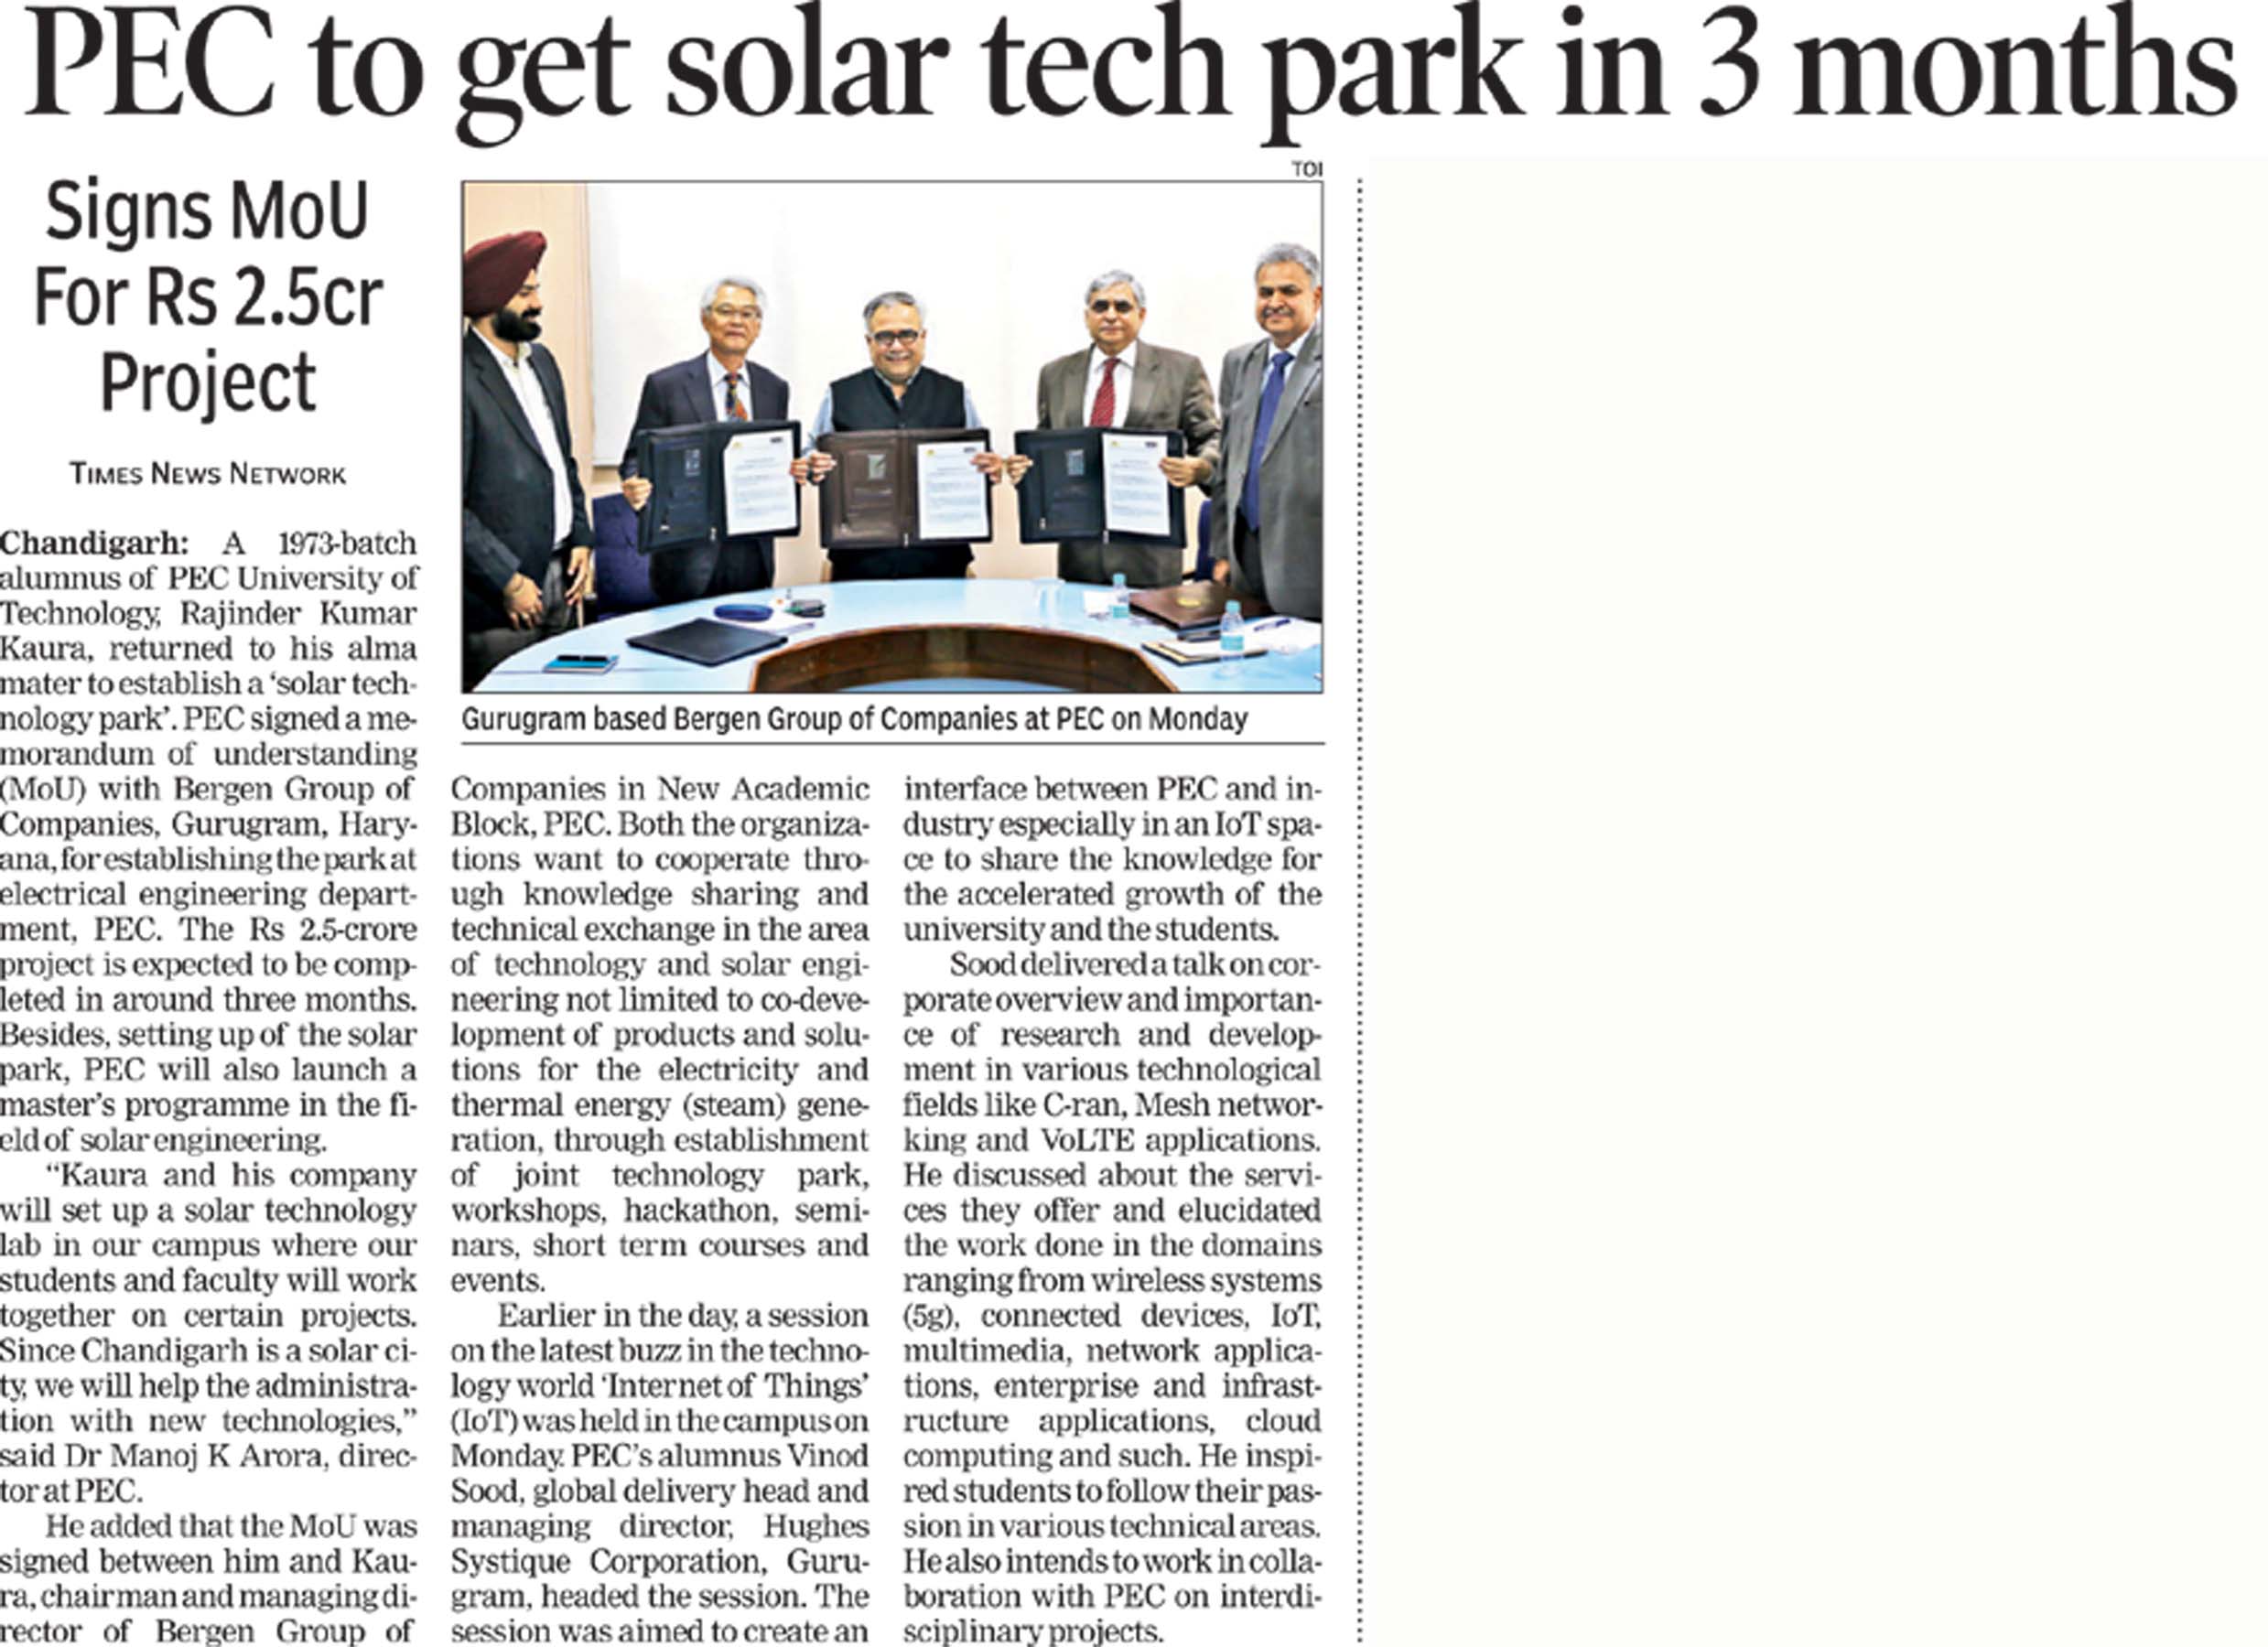 TOI news article- MOU signed between Bergen and PEC